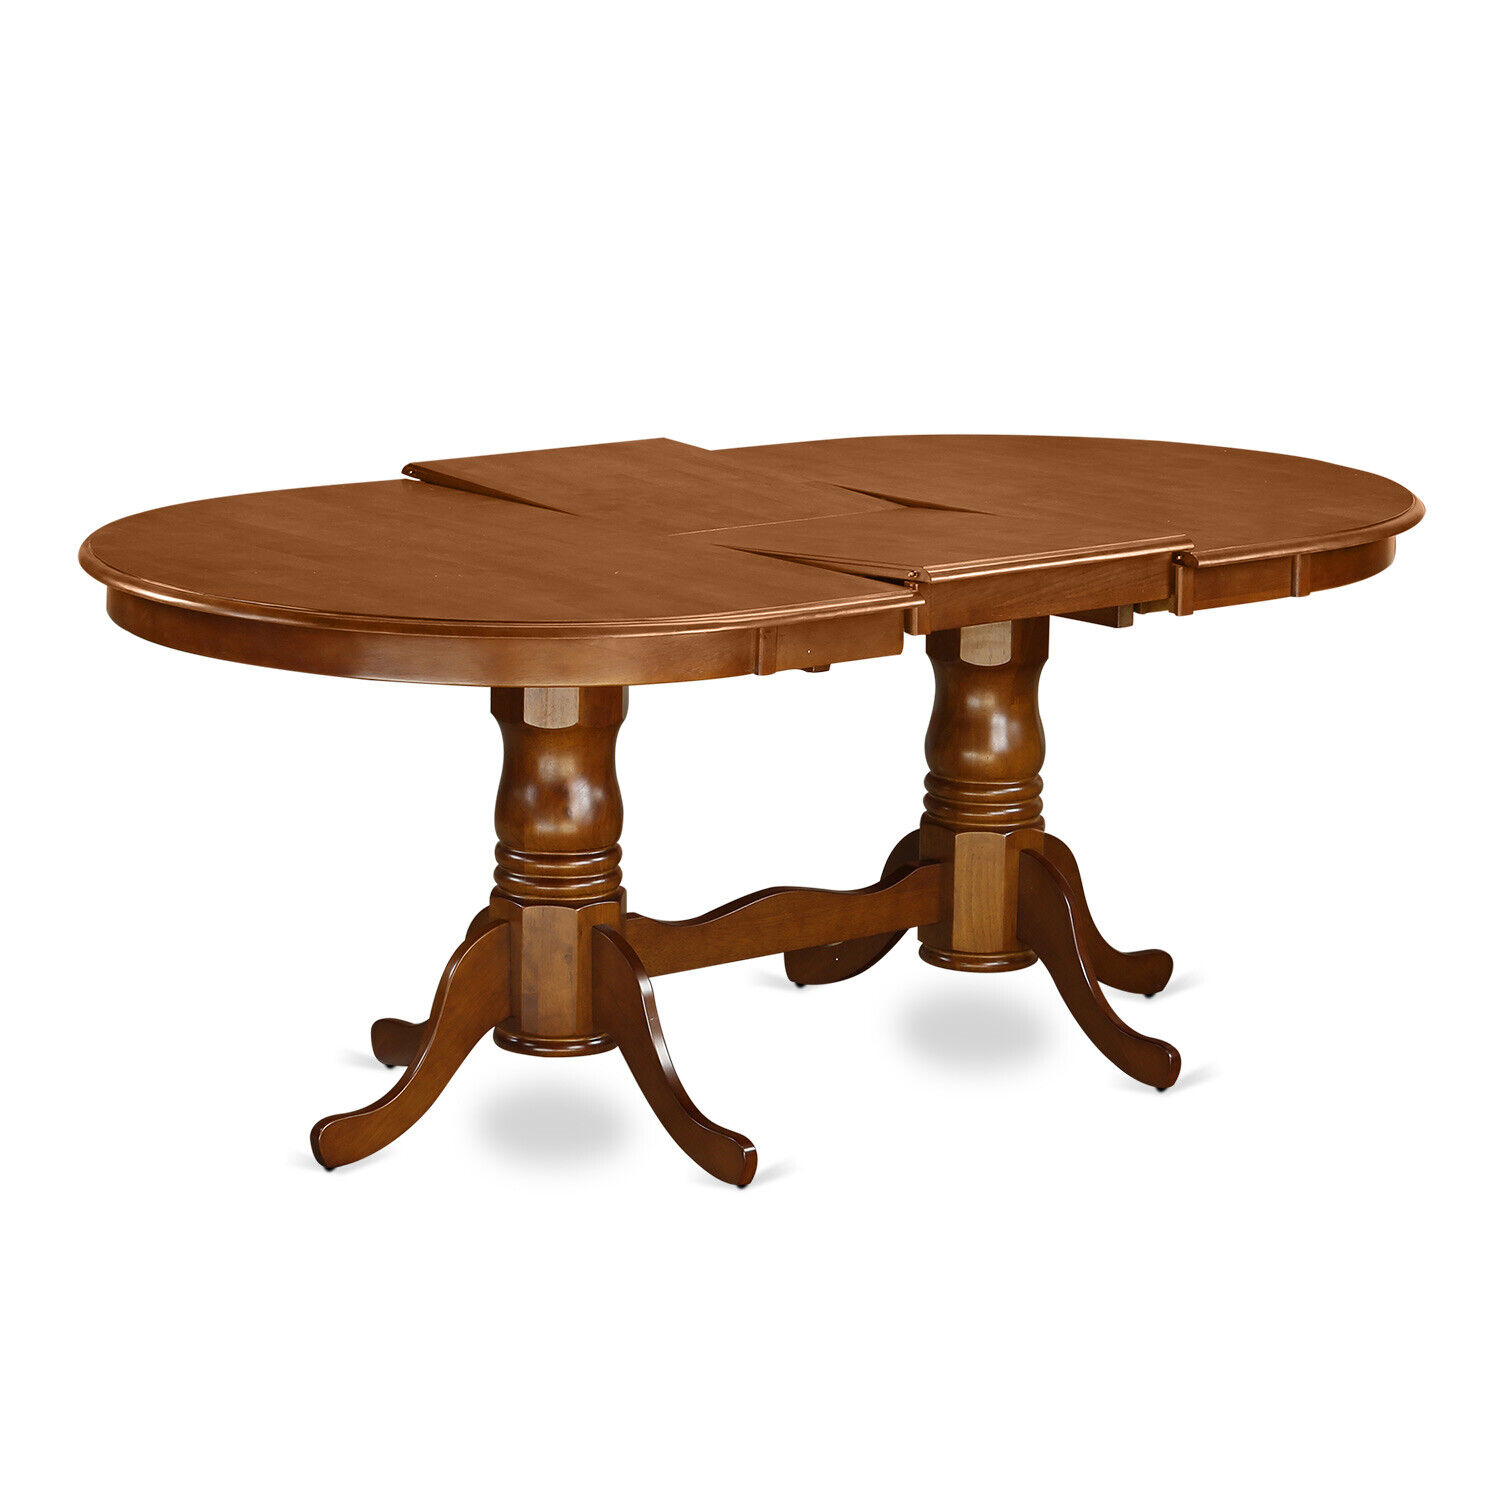 9pc oval dinette kitchen dining table with 8 padded seat chairs in saddle  brown